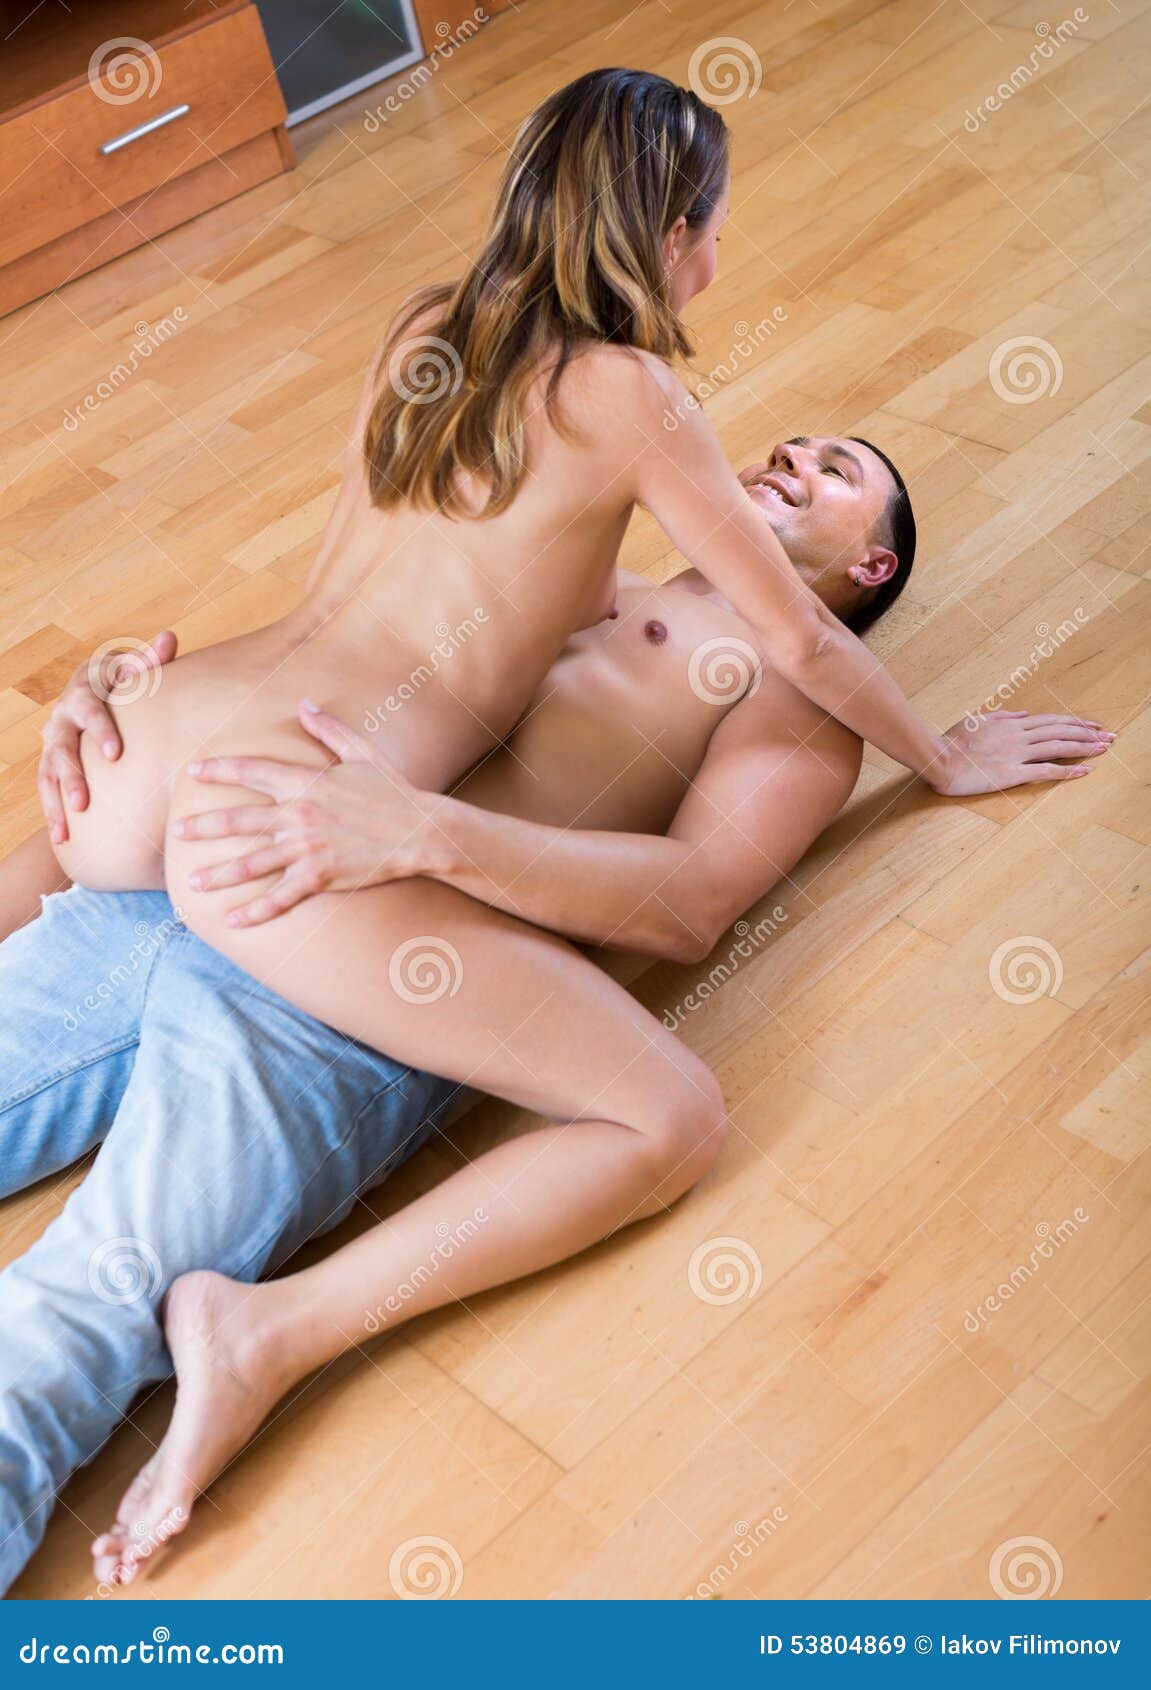 Woman and Man Making Love Indoor Stock Image - Image of female